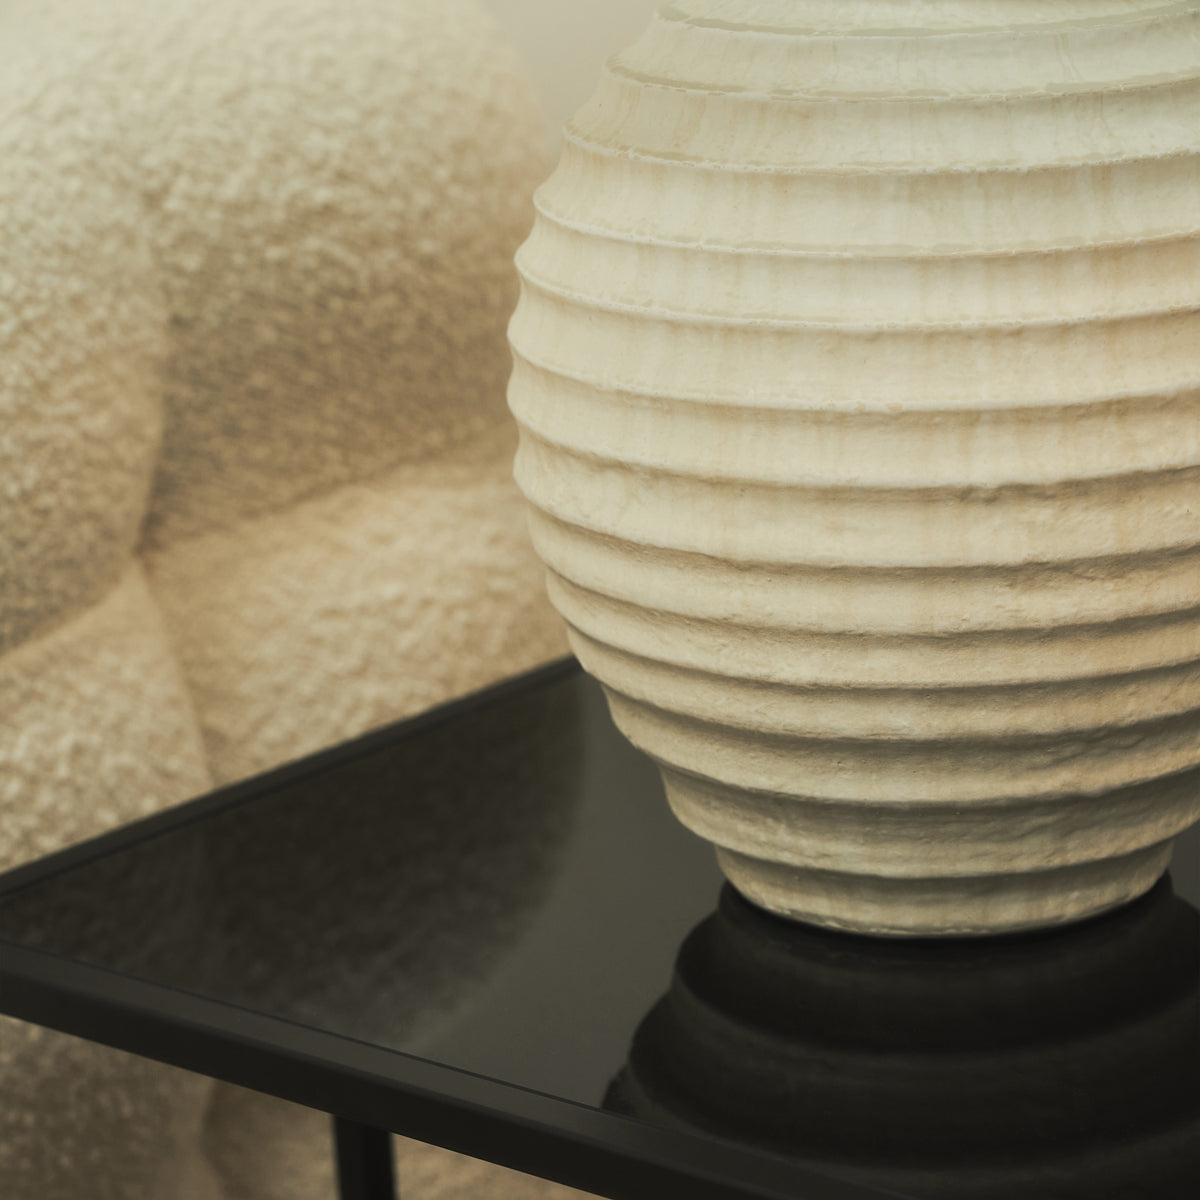 Textured Ceramic Based Table Lamp Natural Shade on brookyln table